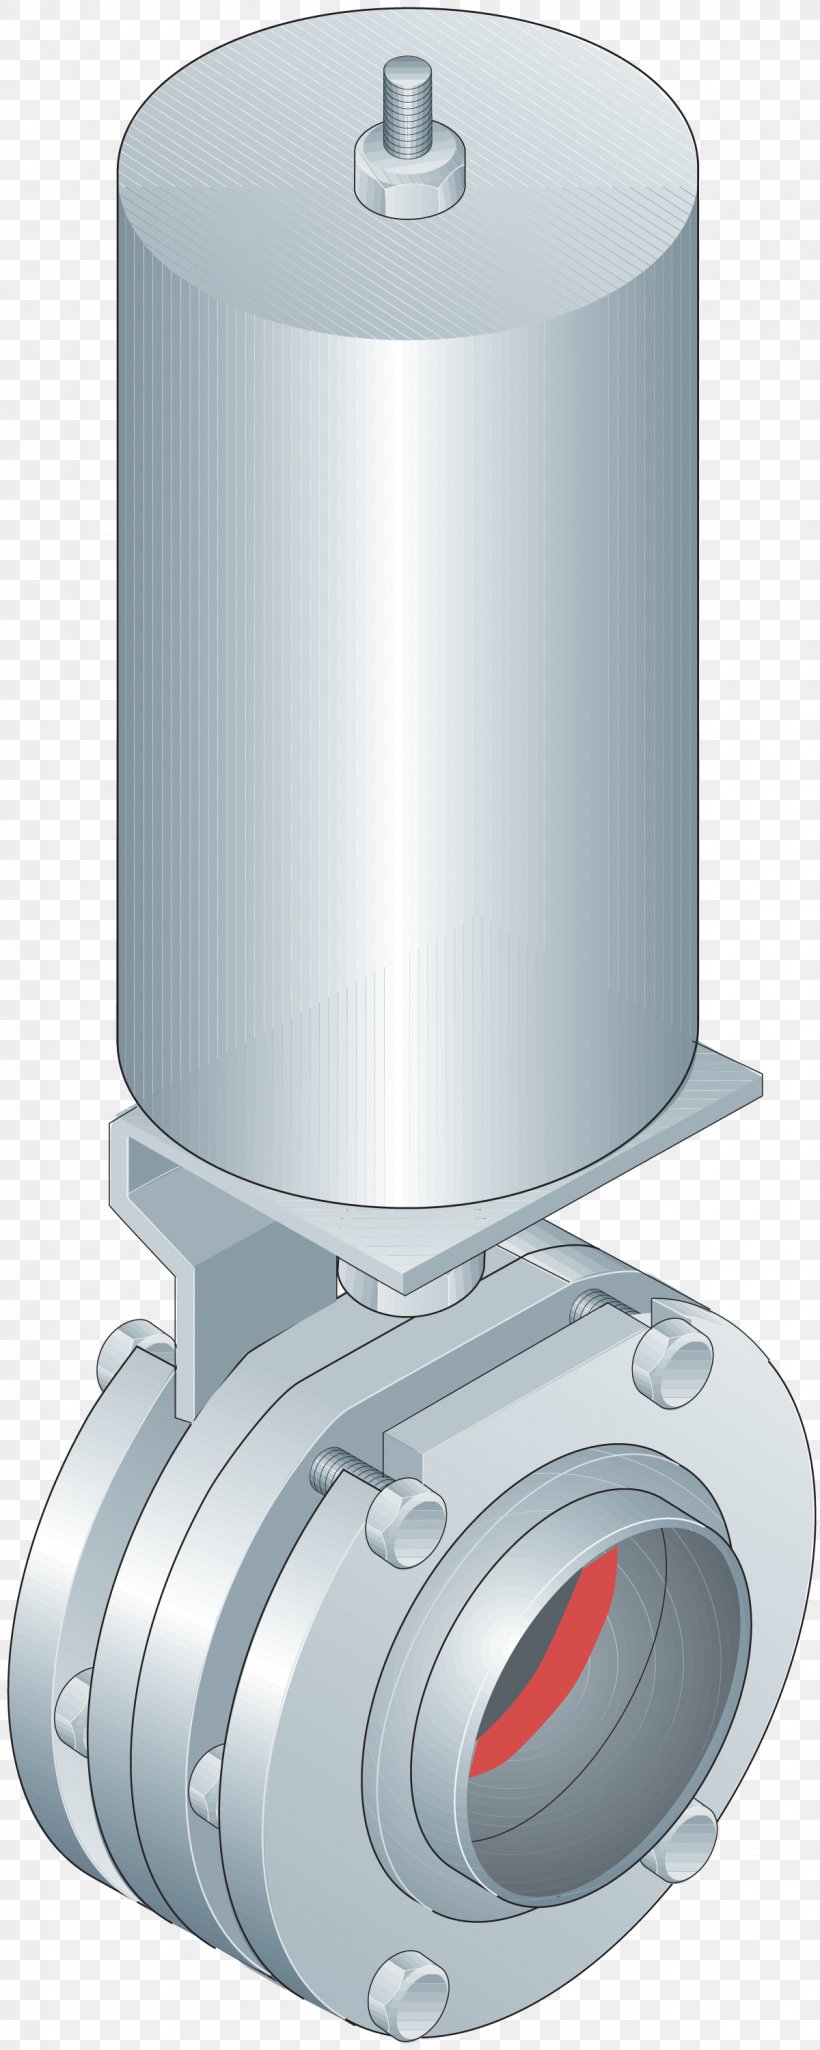 Piping And Plumbing Fitting Pipe Butterfly Valve, PNG, 1200x3000px, Piping And Plumbing Fitting, Butterfly Valve, Cylinder, Diagram, Electrical Conduit Download Free